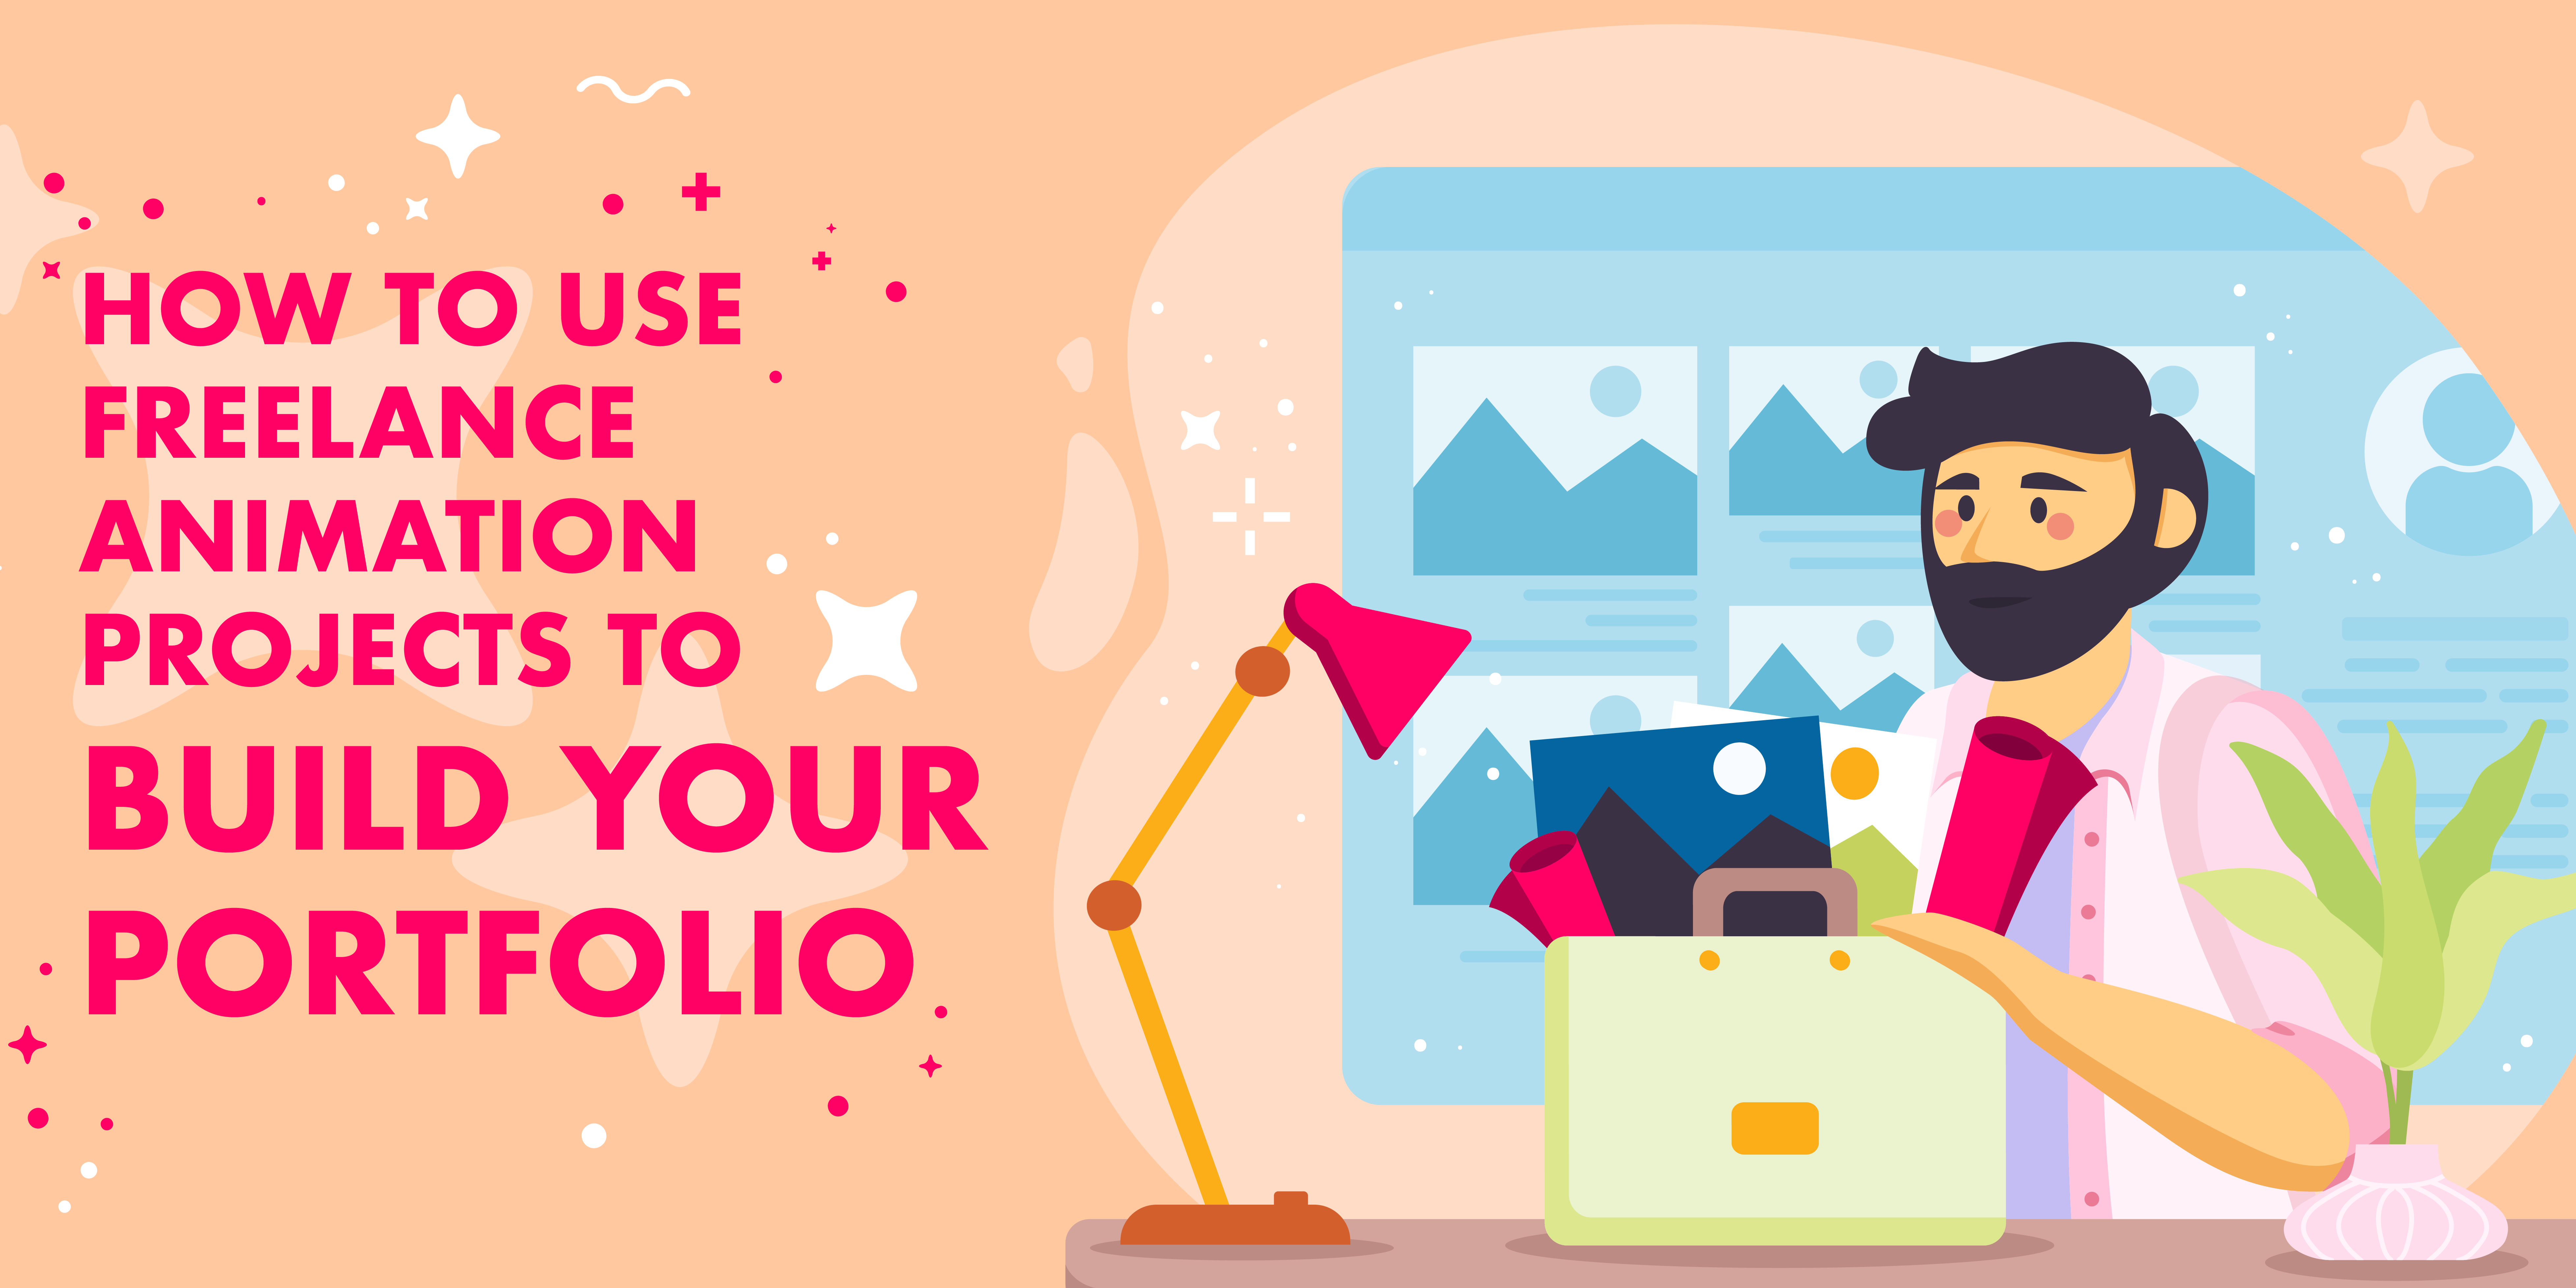 How to use freelance animation projects to build your portfolio -